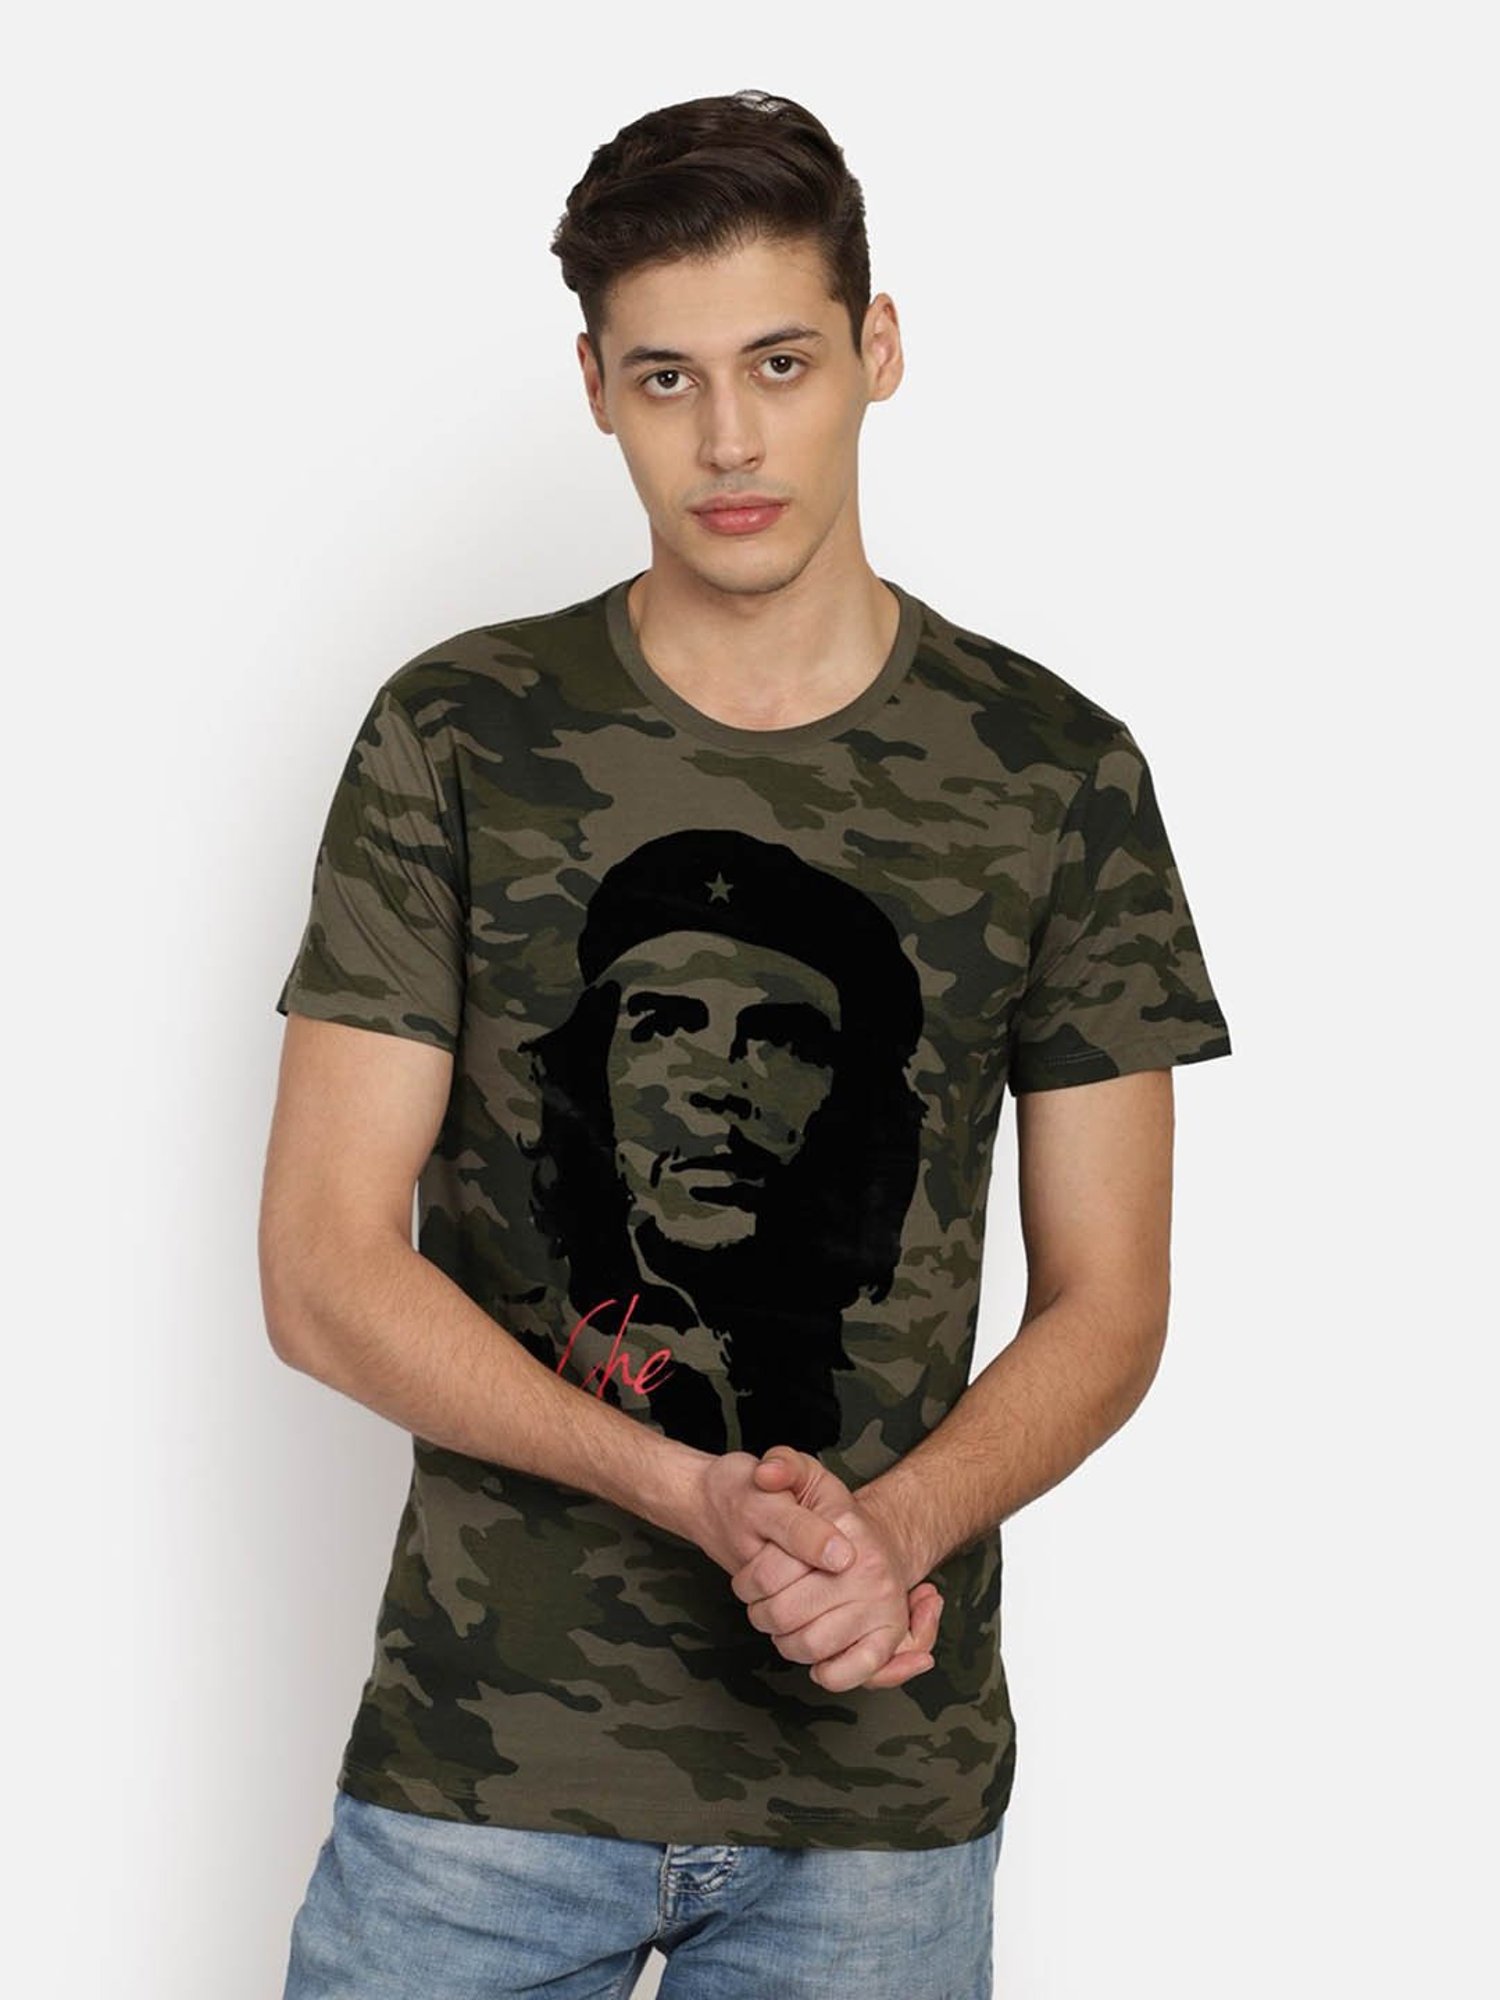 Free Authority T-Shirts : Buy Free Authority Che Guevara Featured